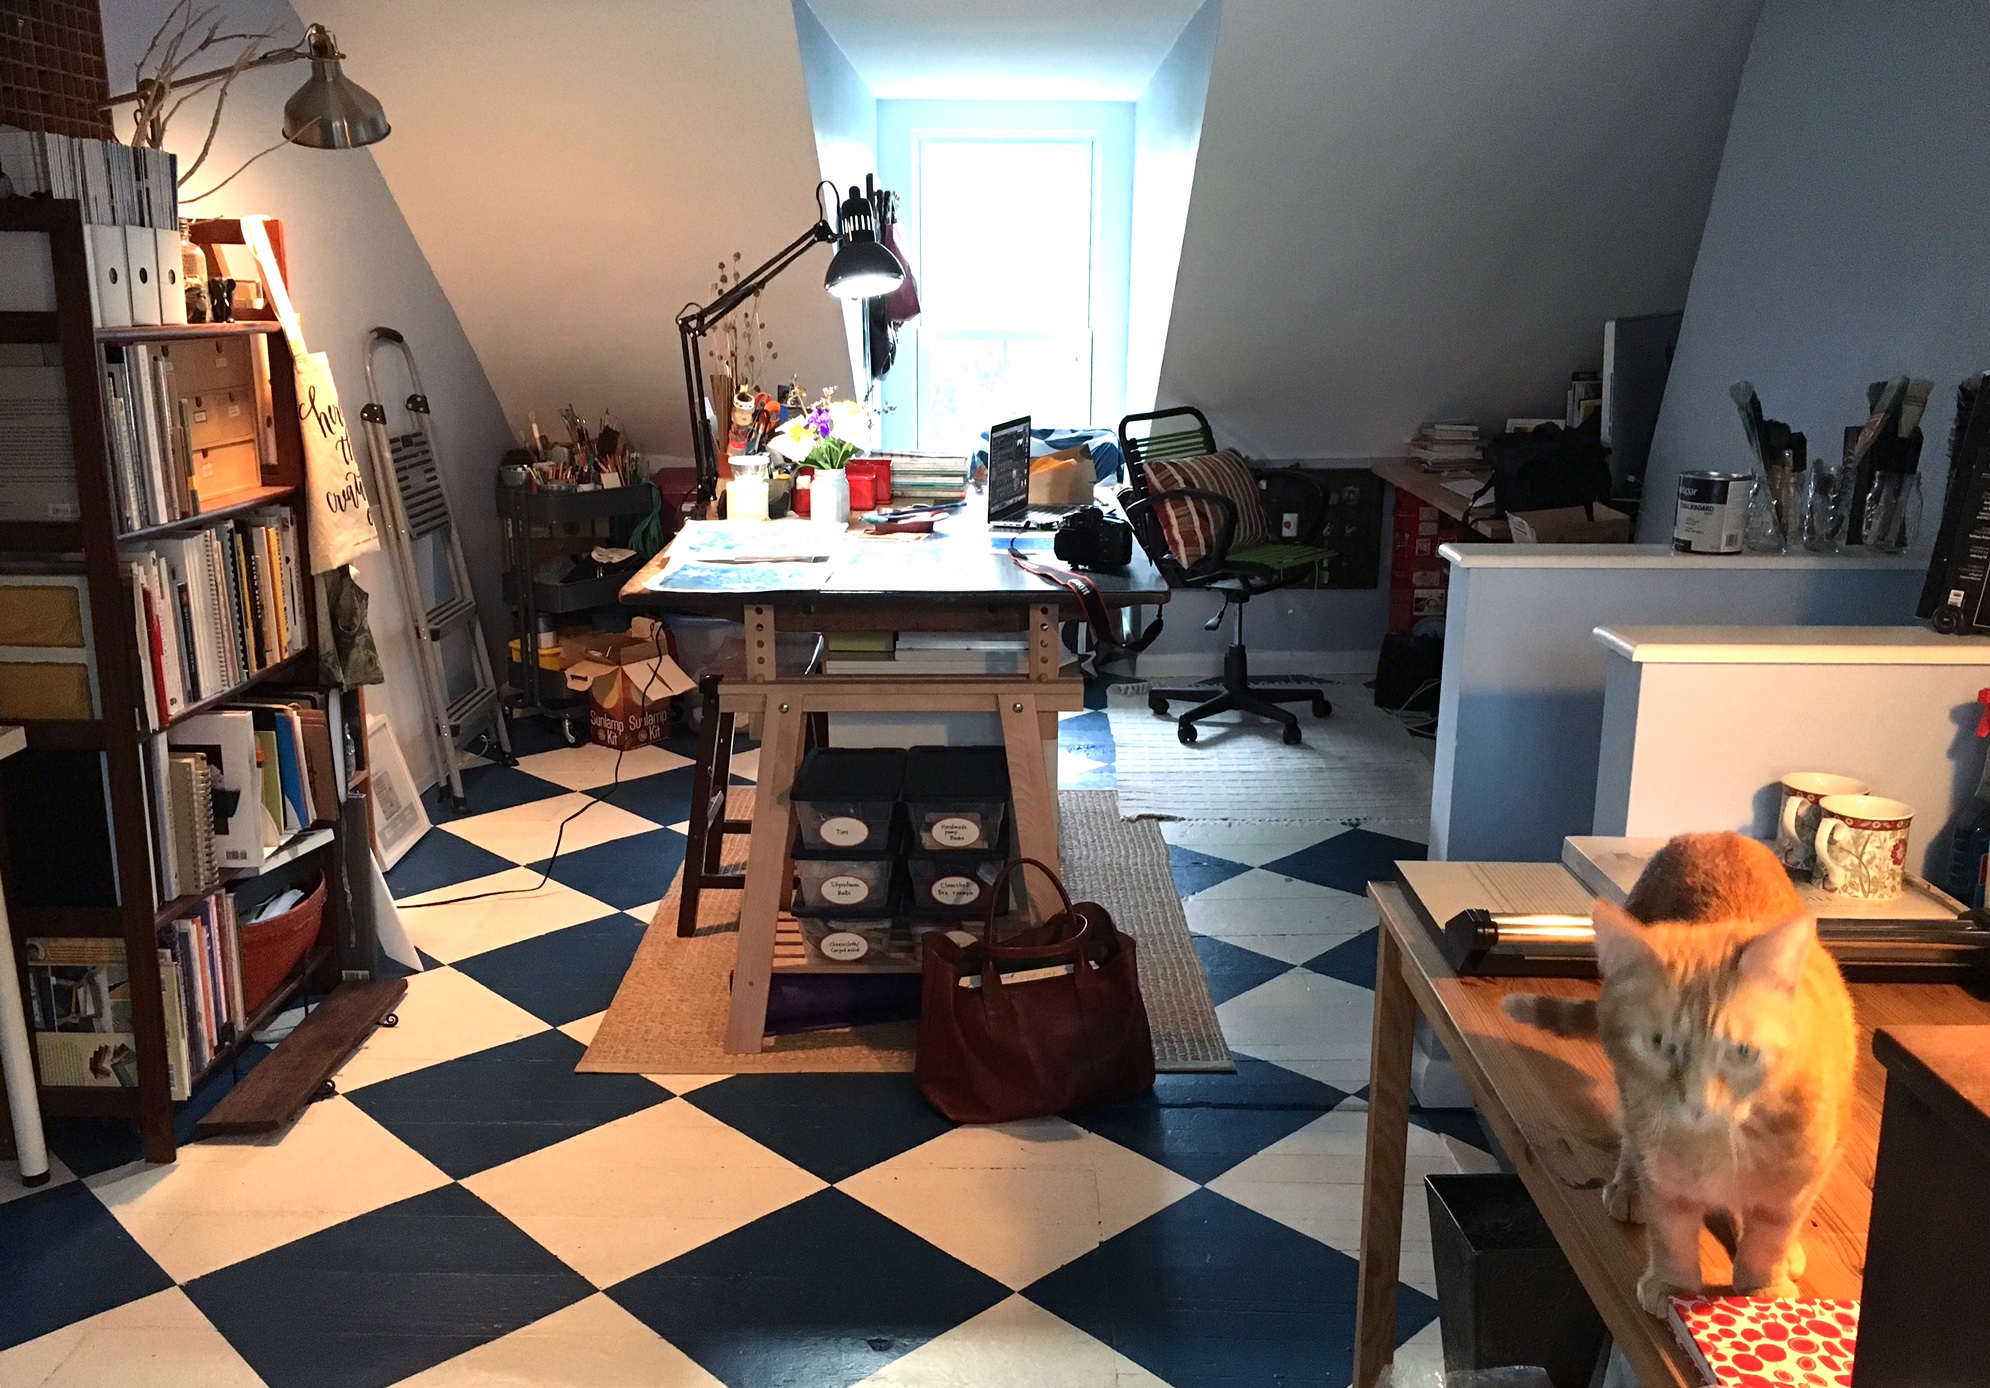 my beloved studio - I painted the floor before moving in